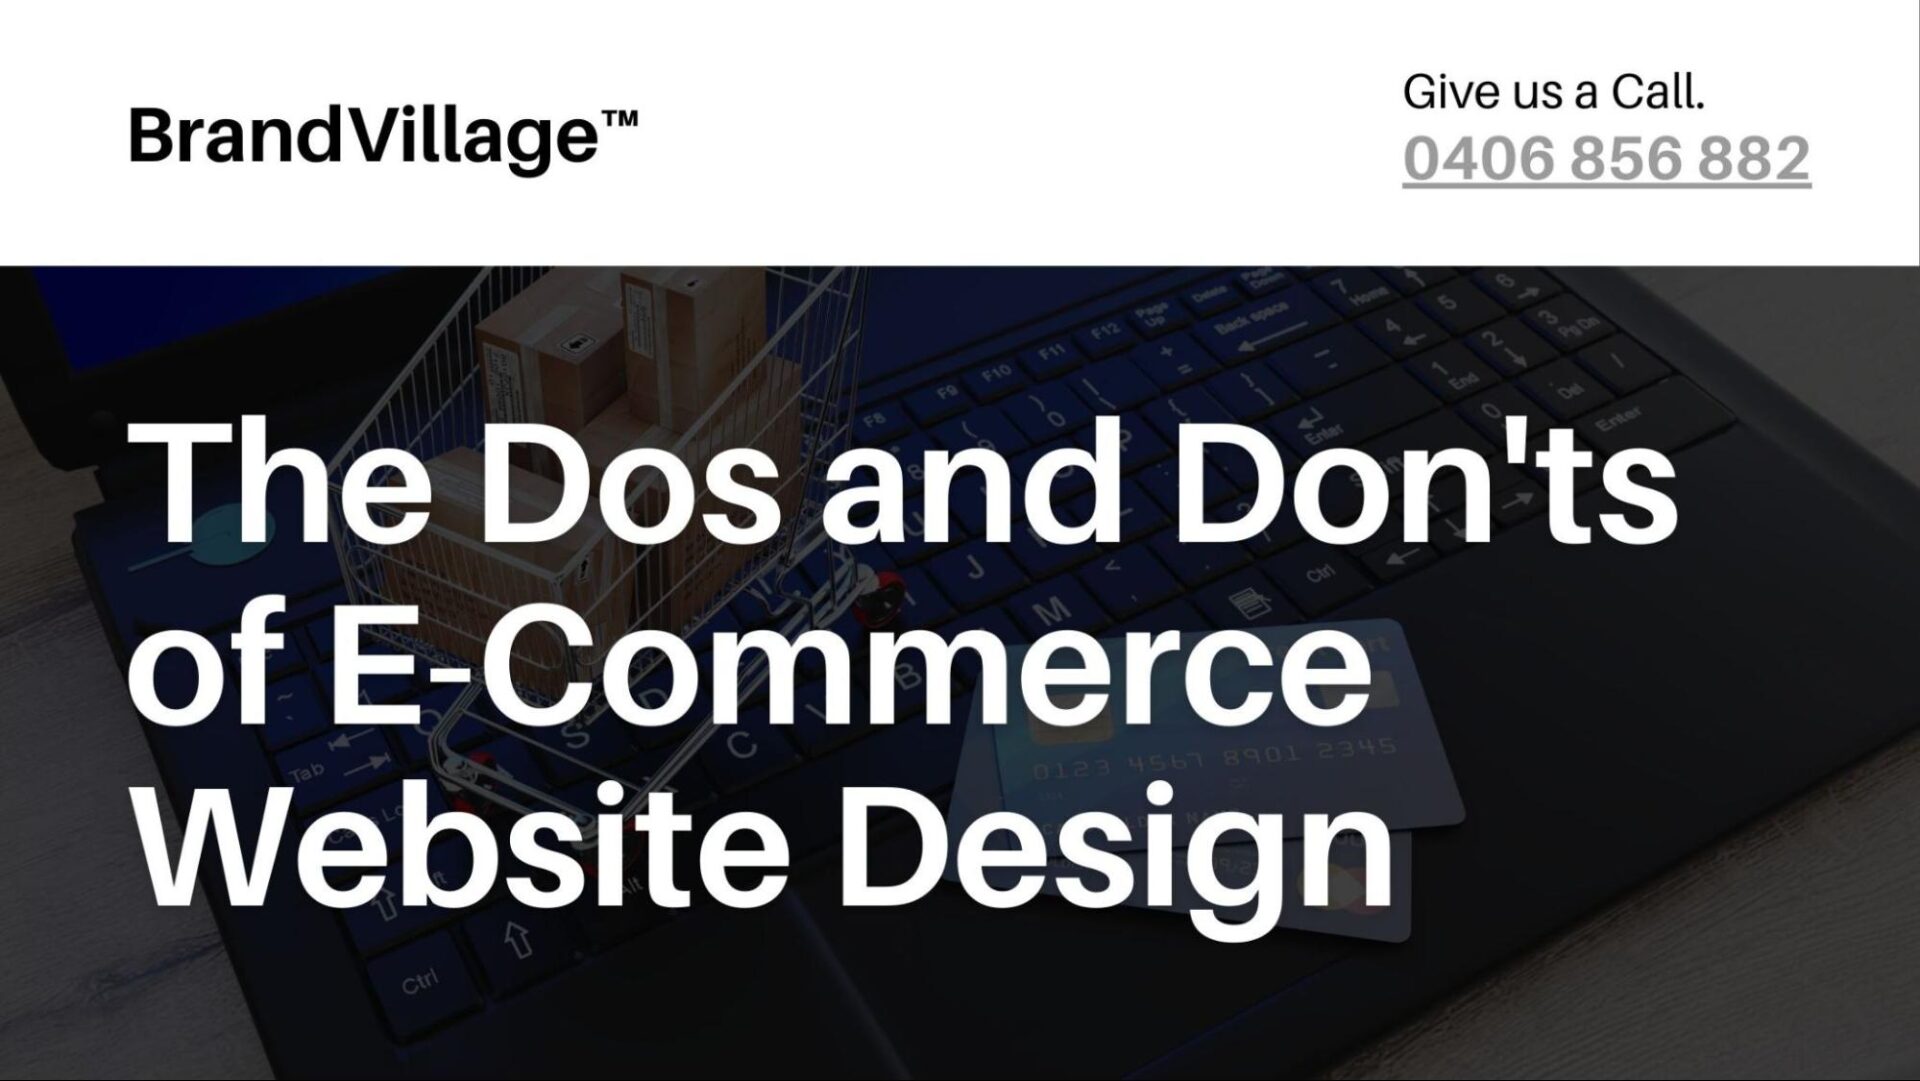 The Dos and Don’ts of E-Commerce Website Design